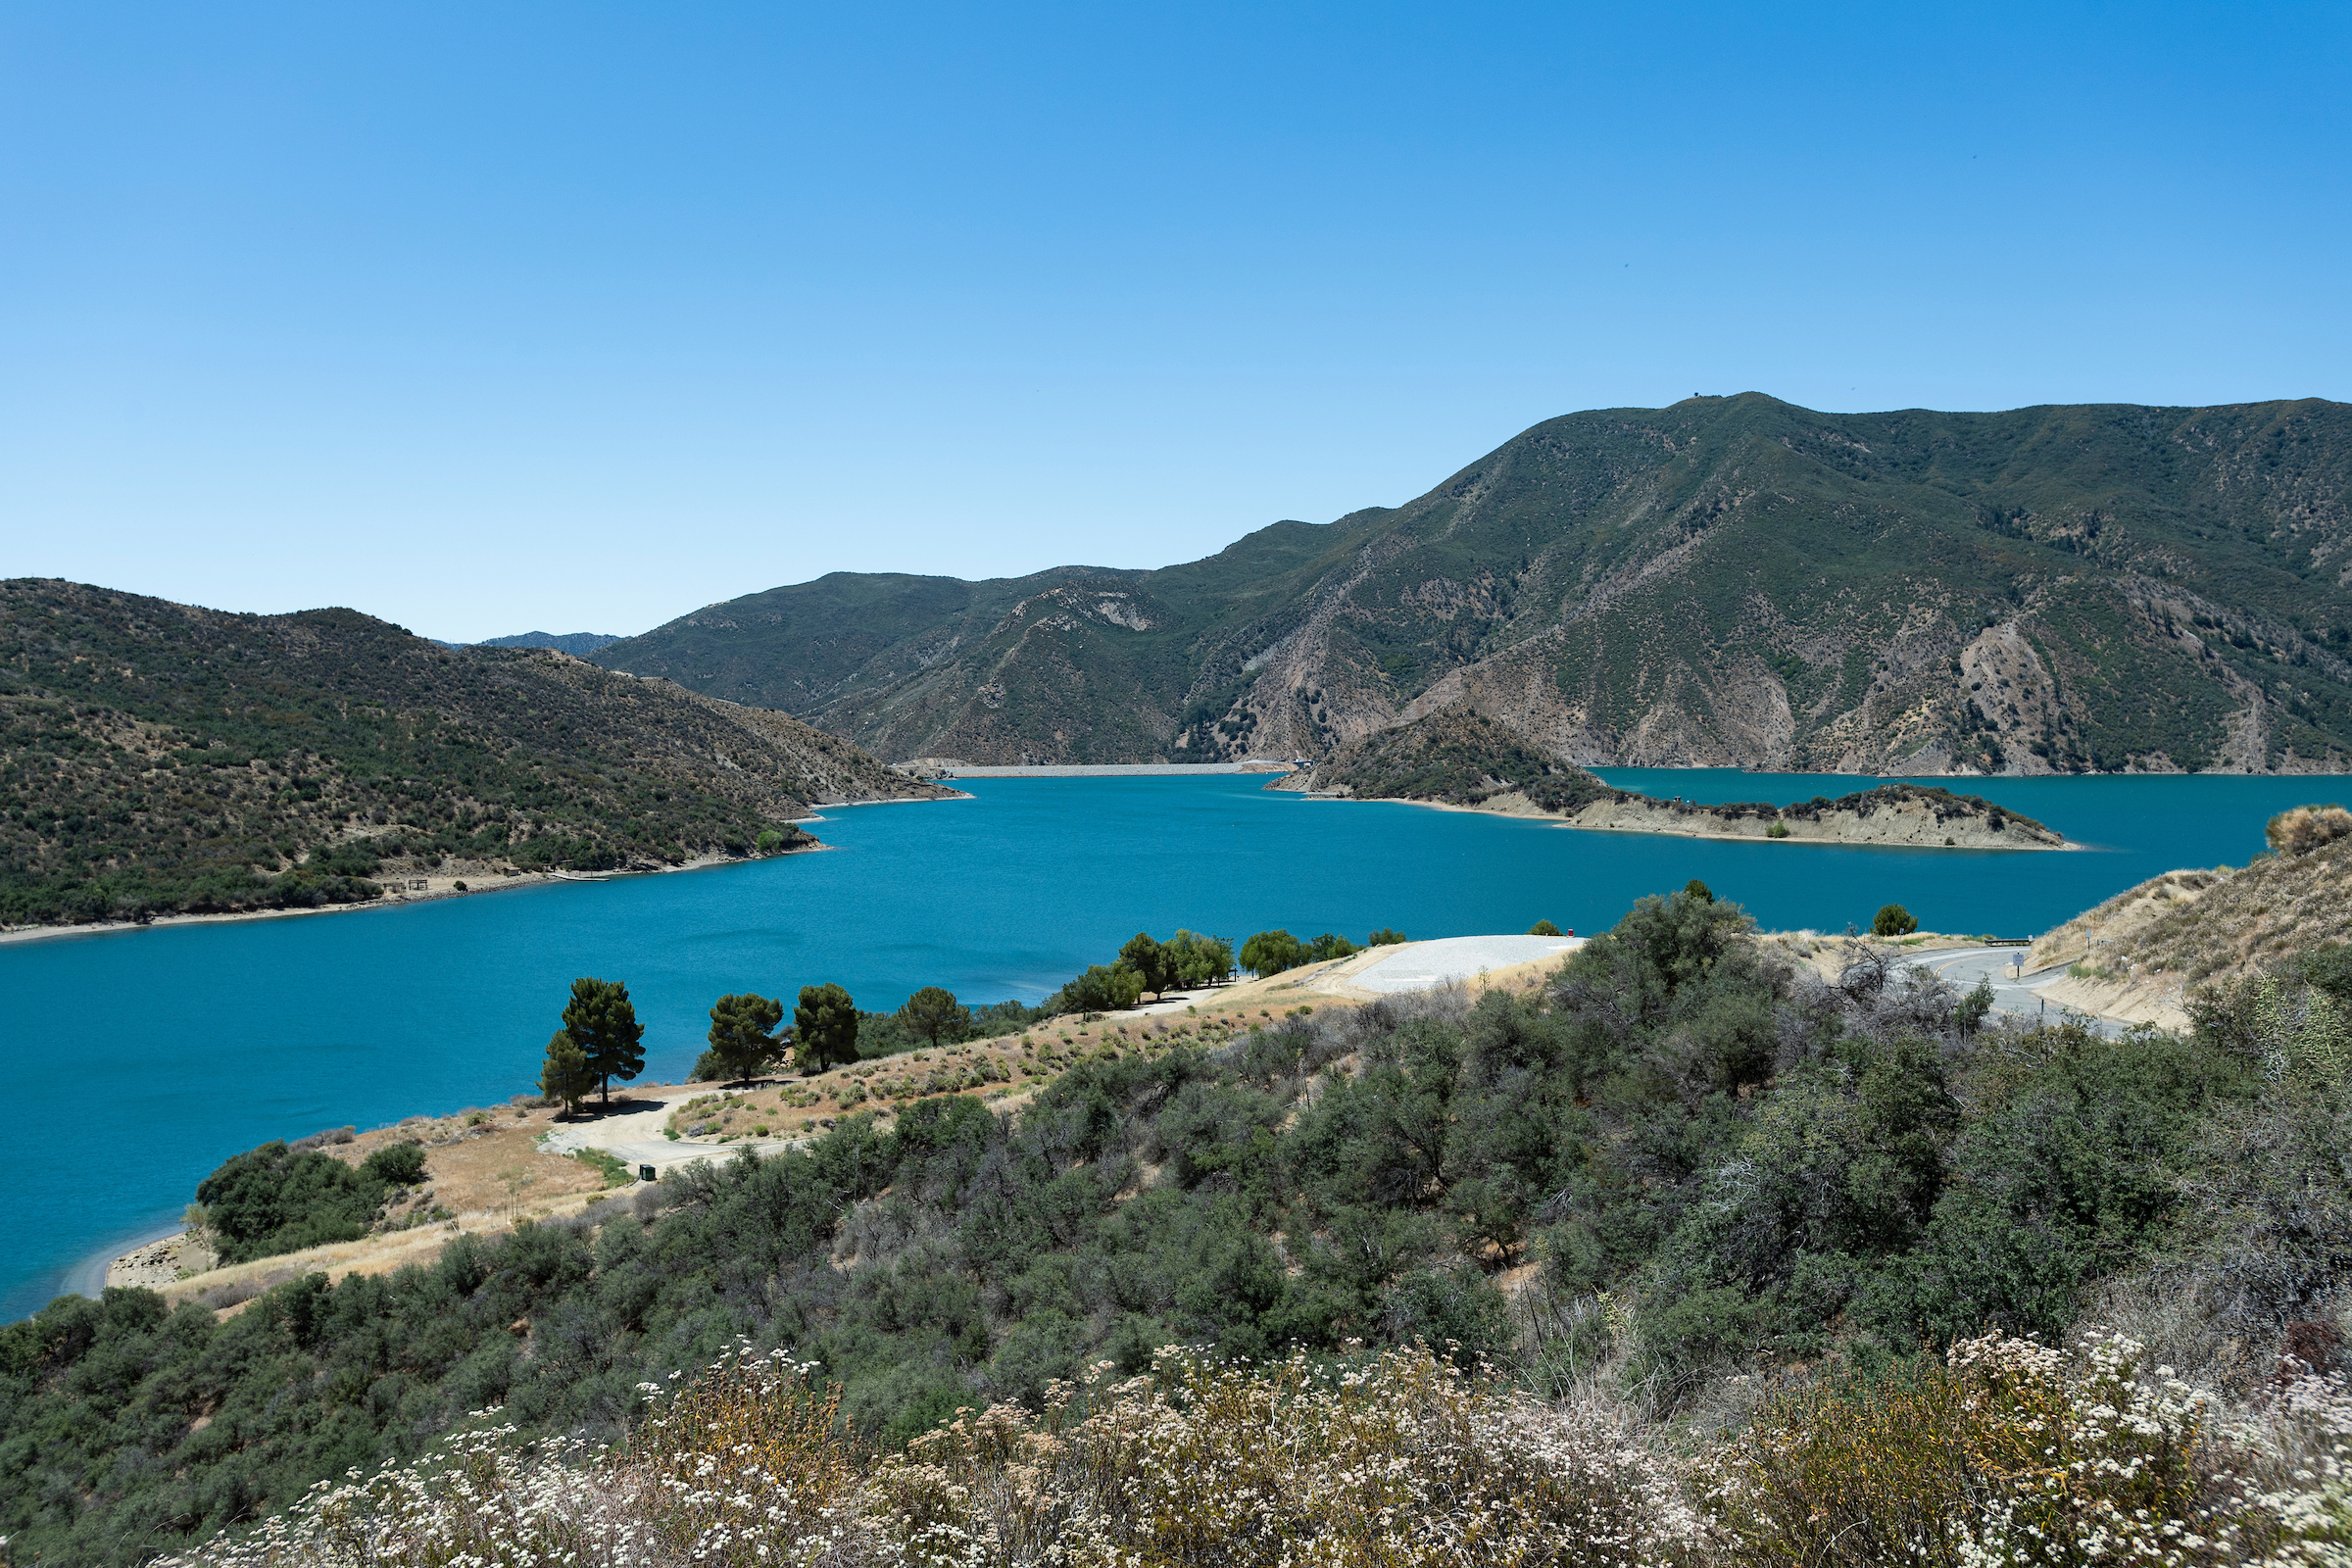 Low water levels are seen at Pyramid Lake, when on this date the reservoir’s in Los Angeles County was 162,986 acre-feet (AF) which is 91 percent of total capacity. California. Photo taken June 8, 2022.